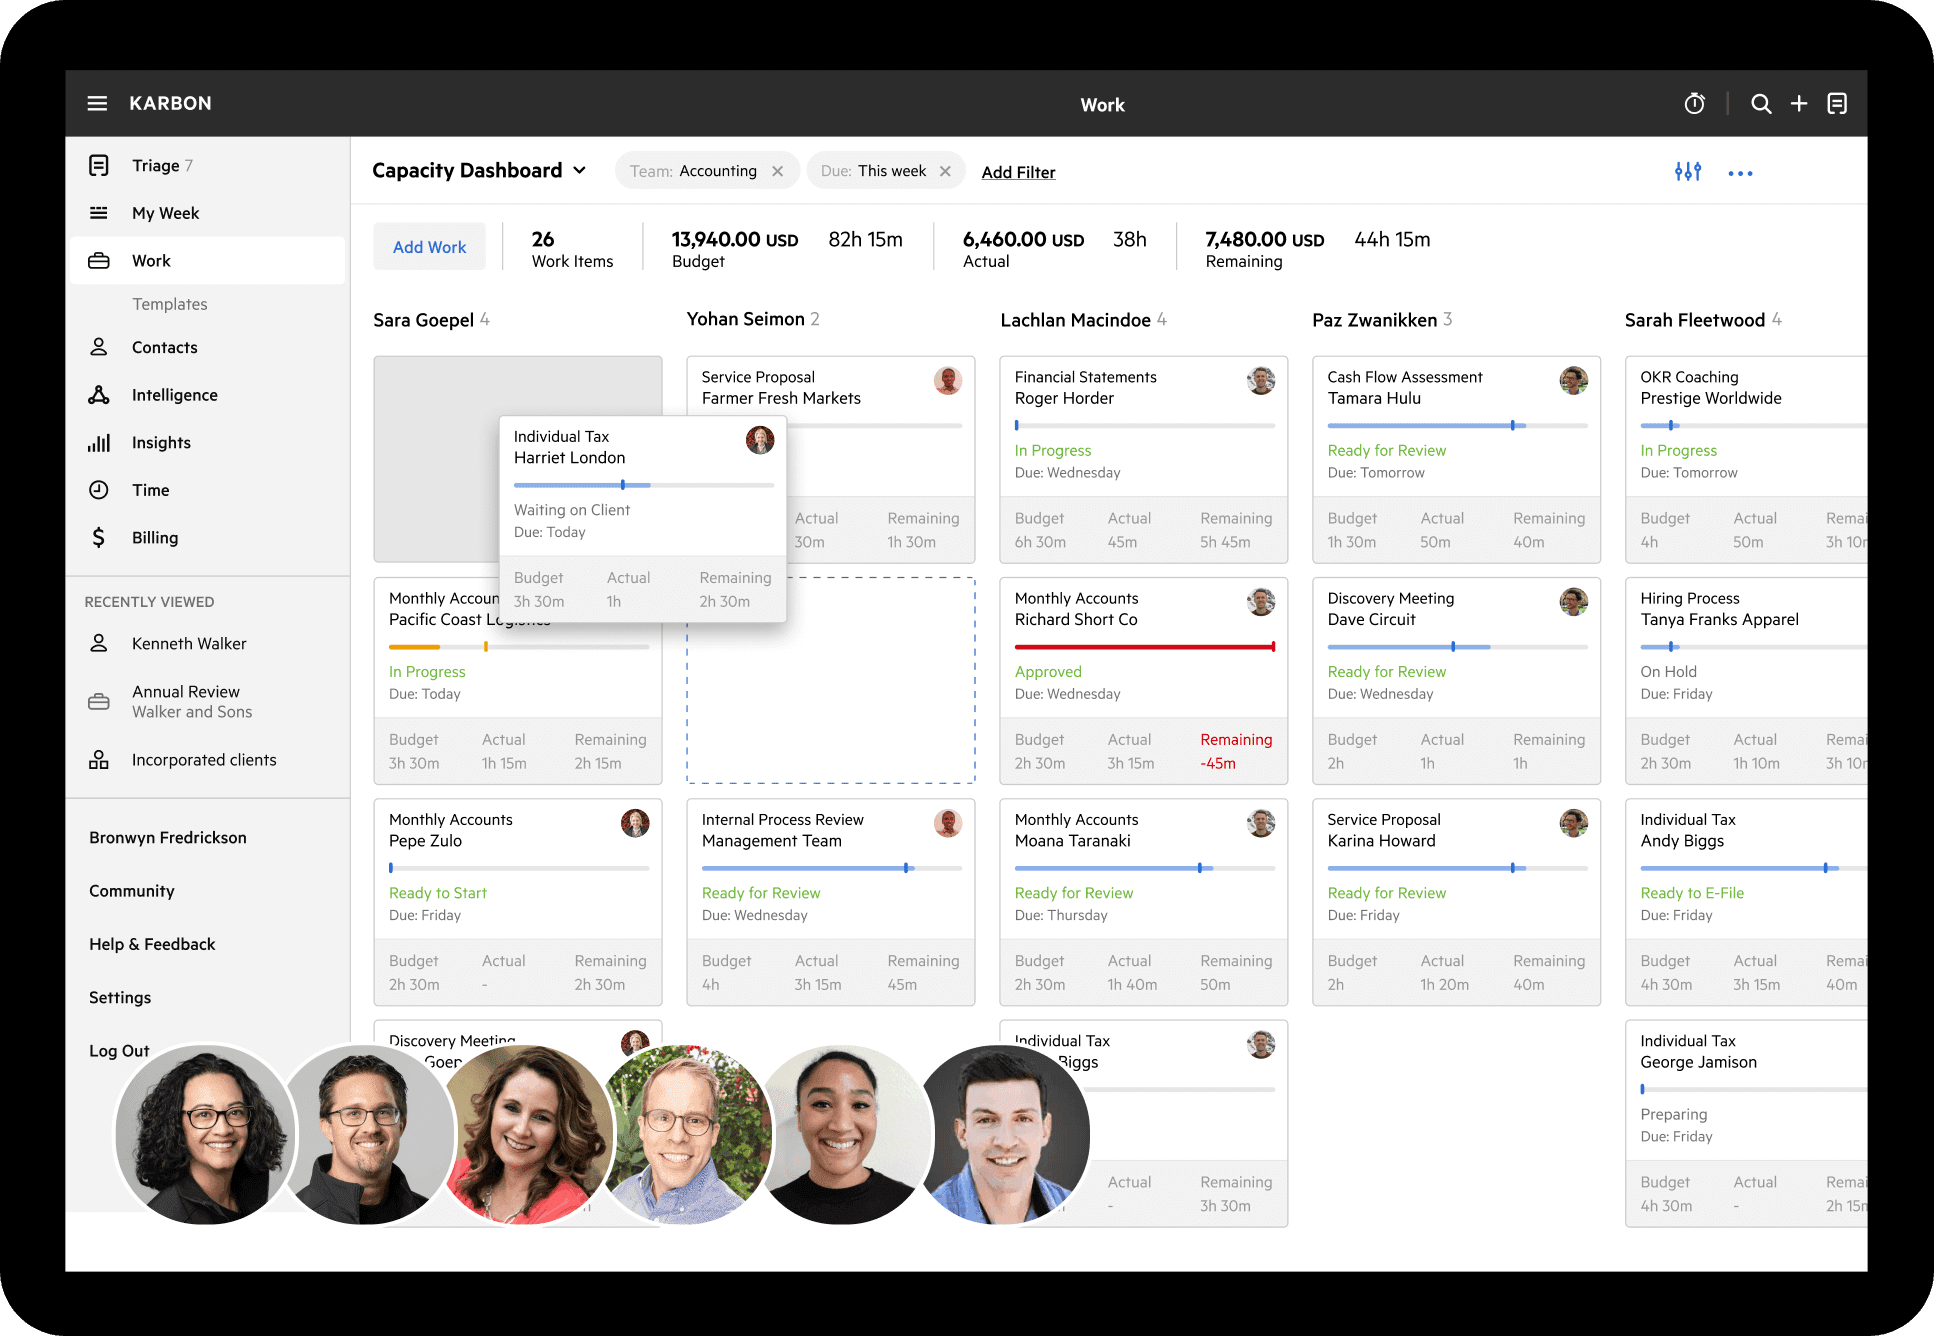 A kanban interface in the Karbon app, with overlaid staff avatars